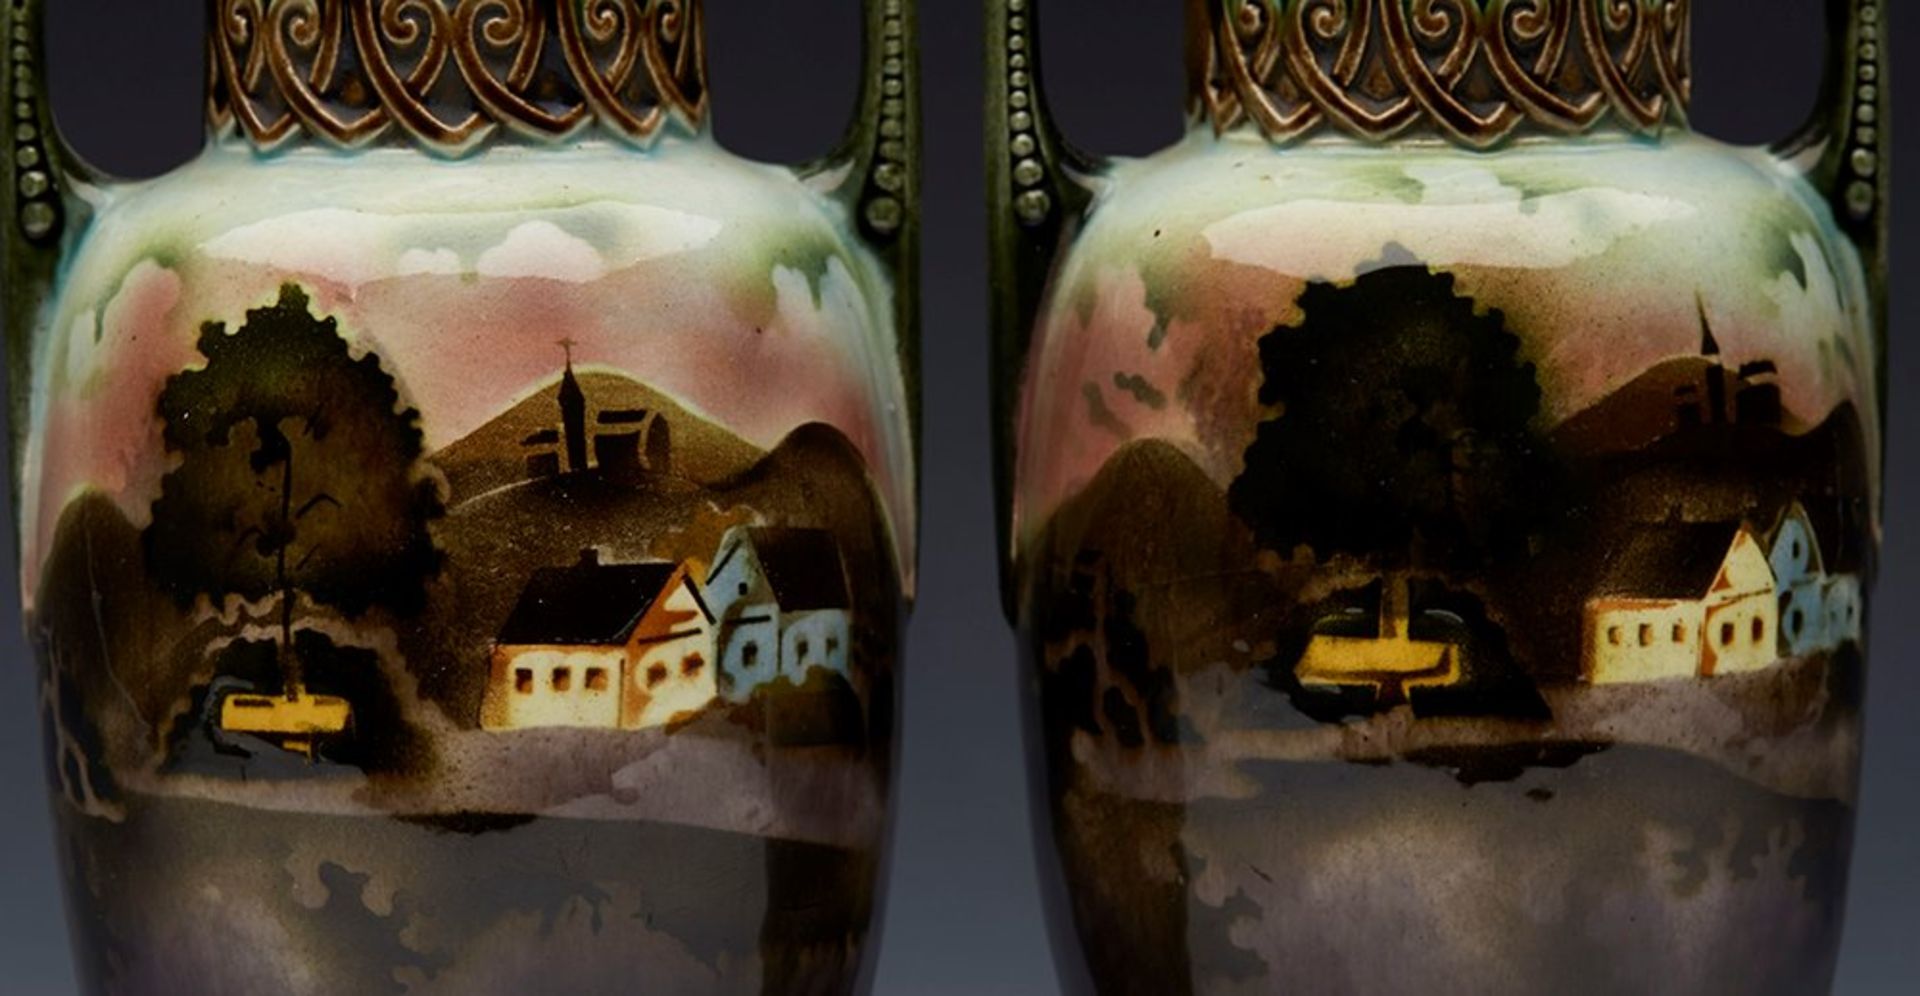 PAIR ANTIQUE CONTINENTAL MAJOLICA LANDSCAPE PAINTED VASES 19TH C.   DIMENSIONS   Height 17,5cm, - Image 3 of 9